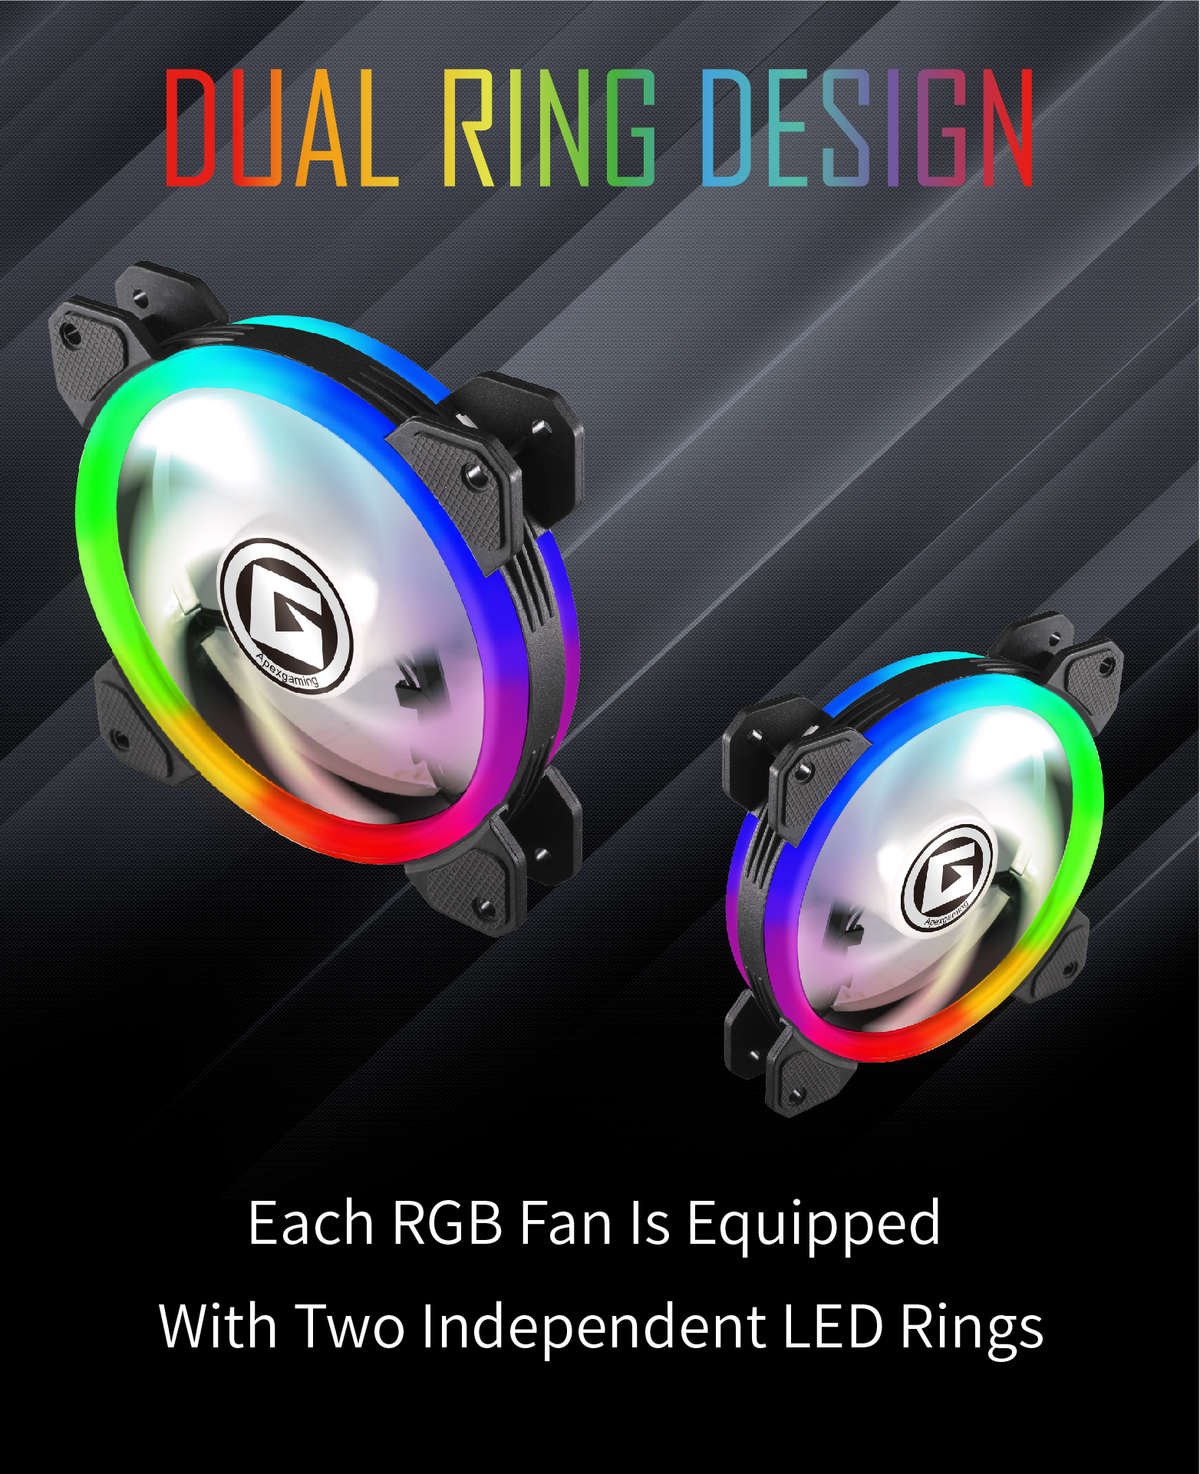 GELID Solutions - Introducing the Stella Infinity, an unbeatable 120mm Dual  Ring ARGB fan with a vibrant design, sturdy build, and low noise operation,  making it the perfect addition to your gaming